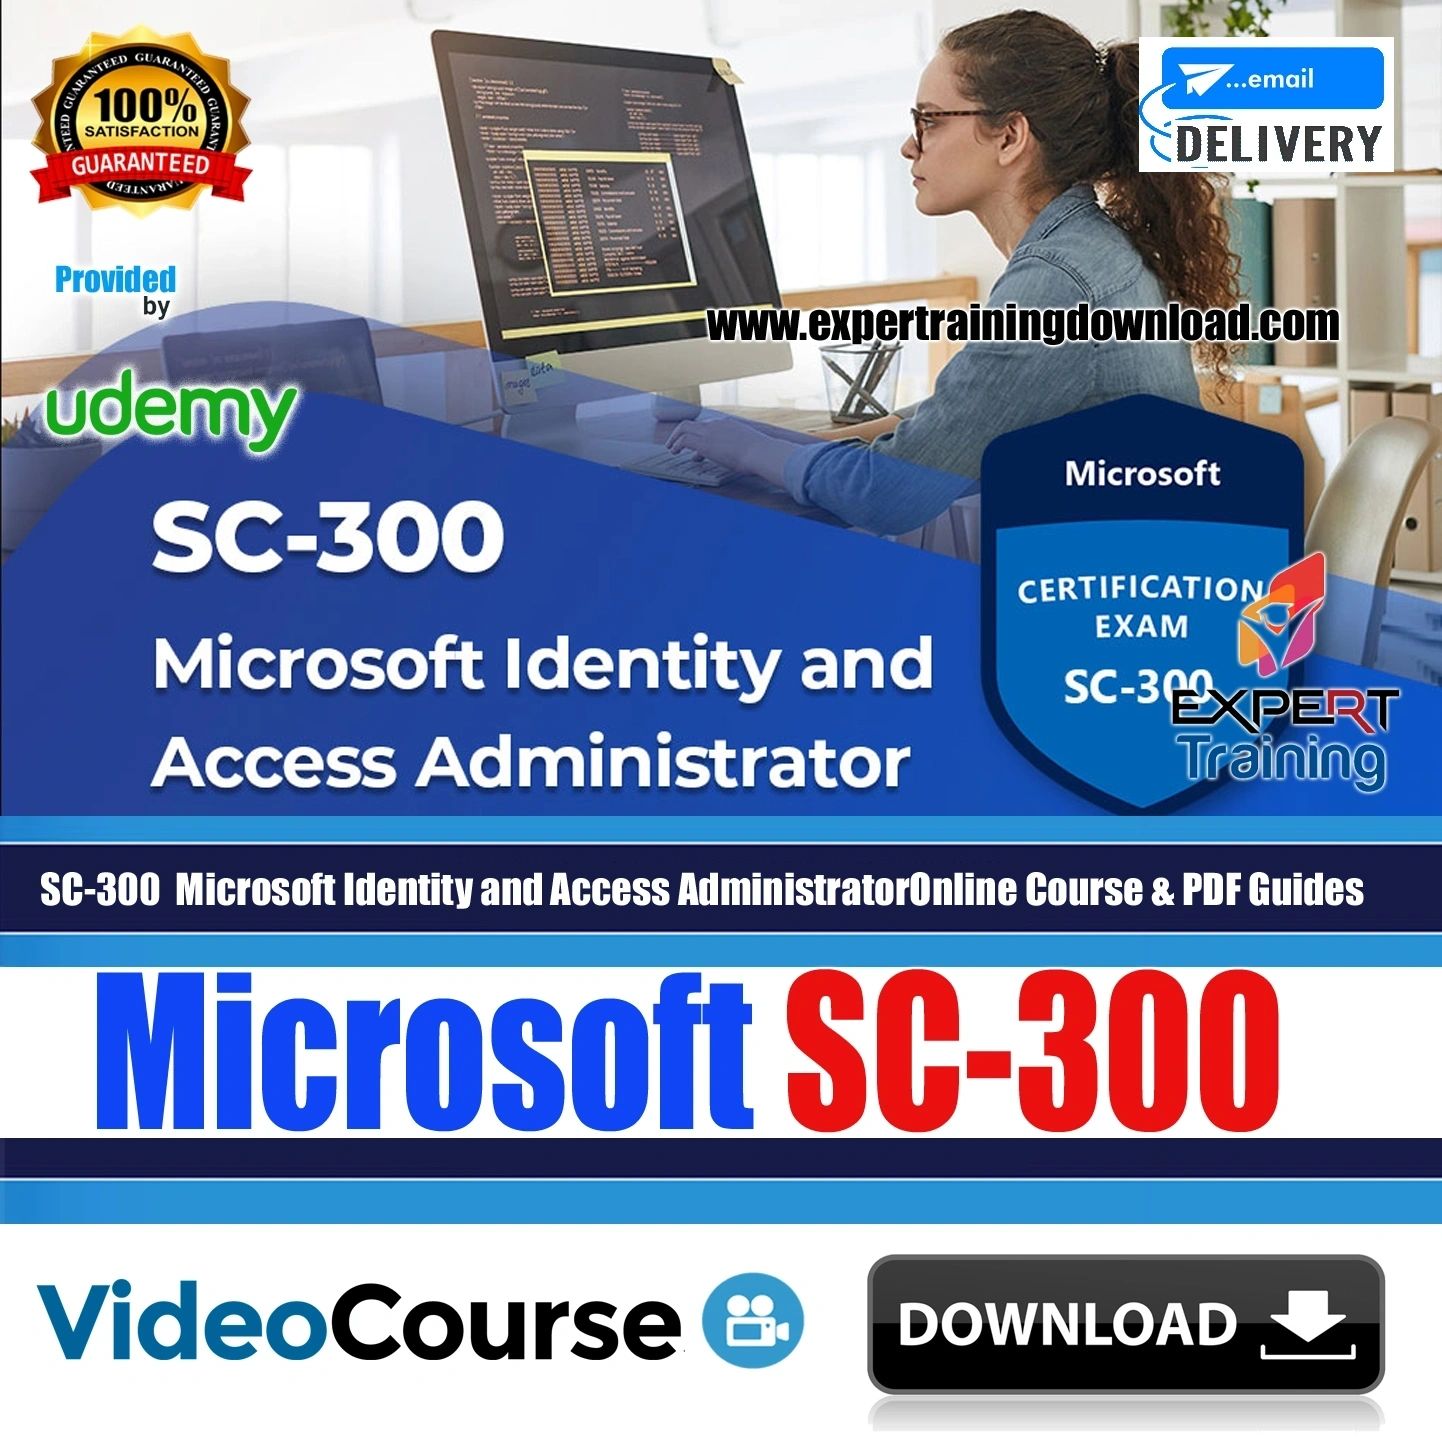 SC-300 Microsoft Identity and Access Administrator Online Course